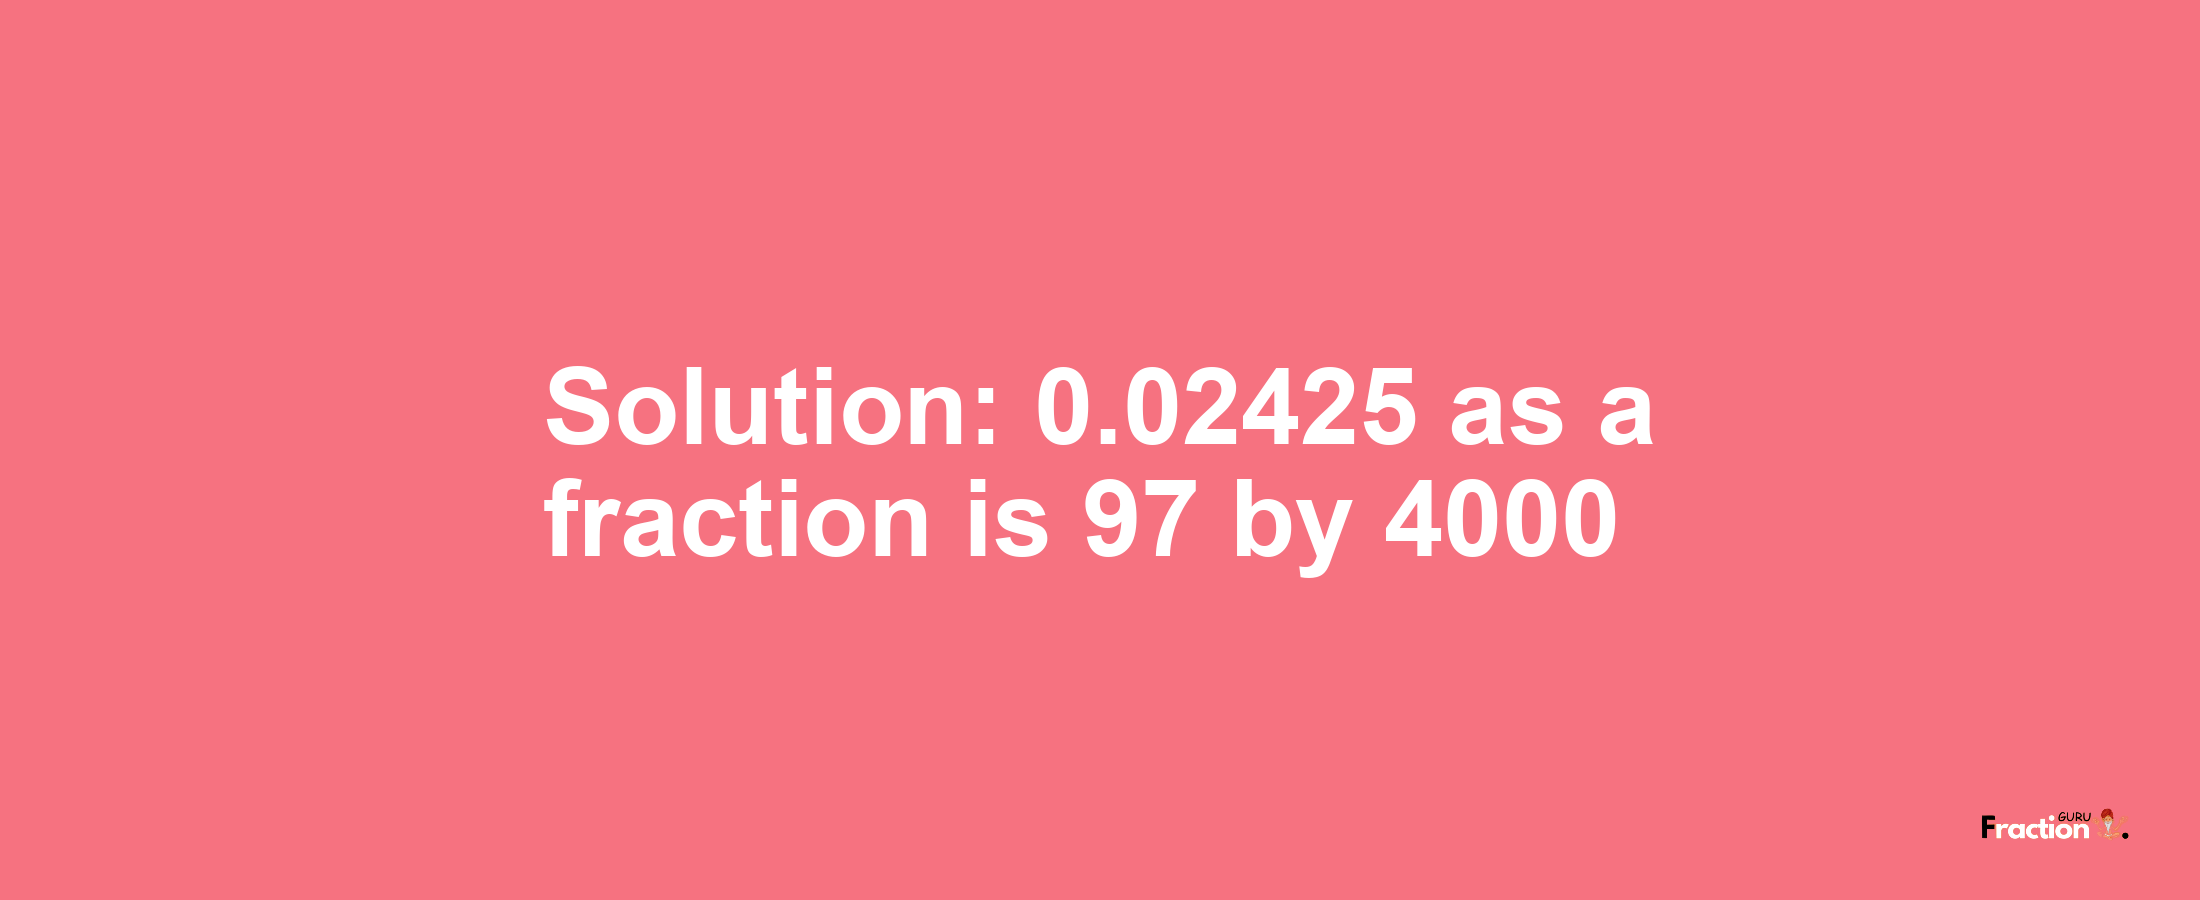 Solution:0.02425 as a fraction is 97/4000